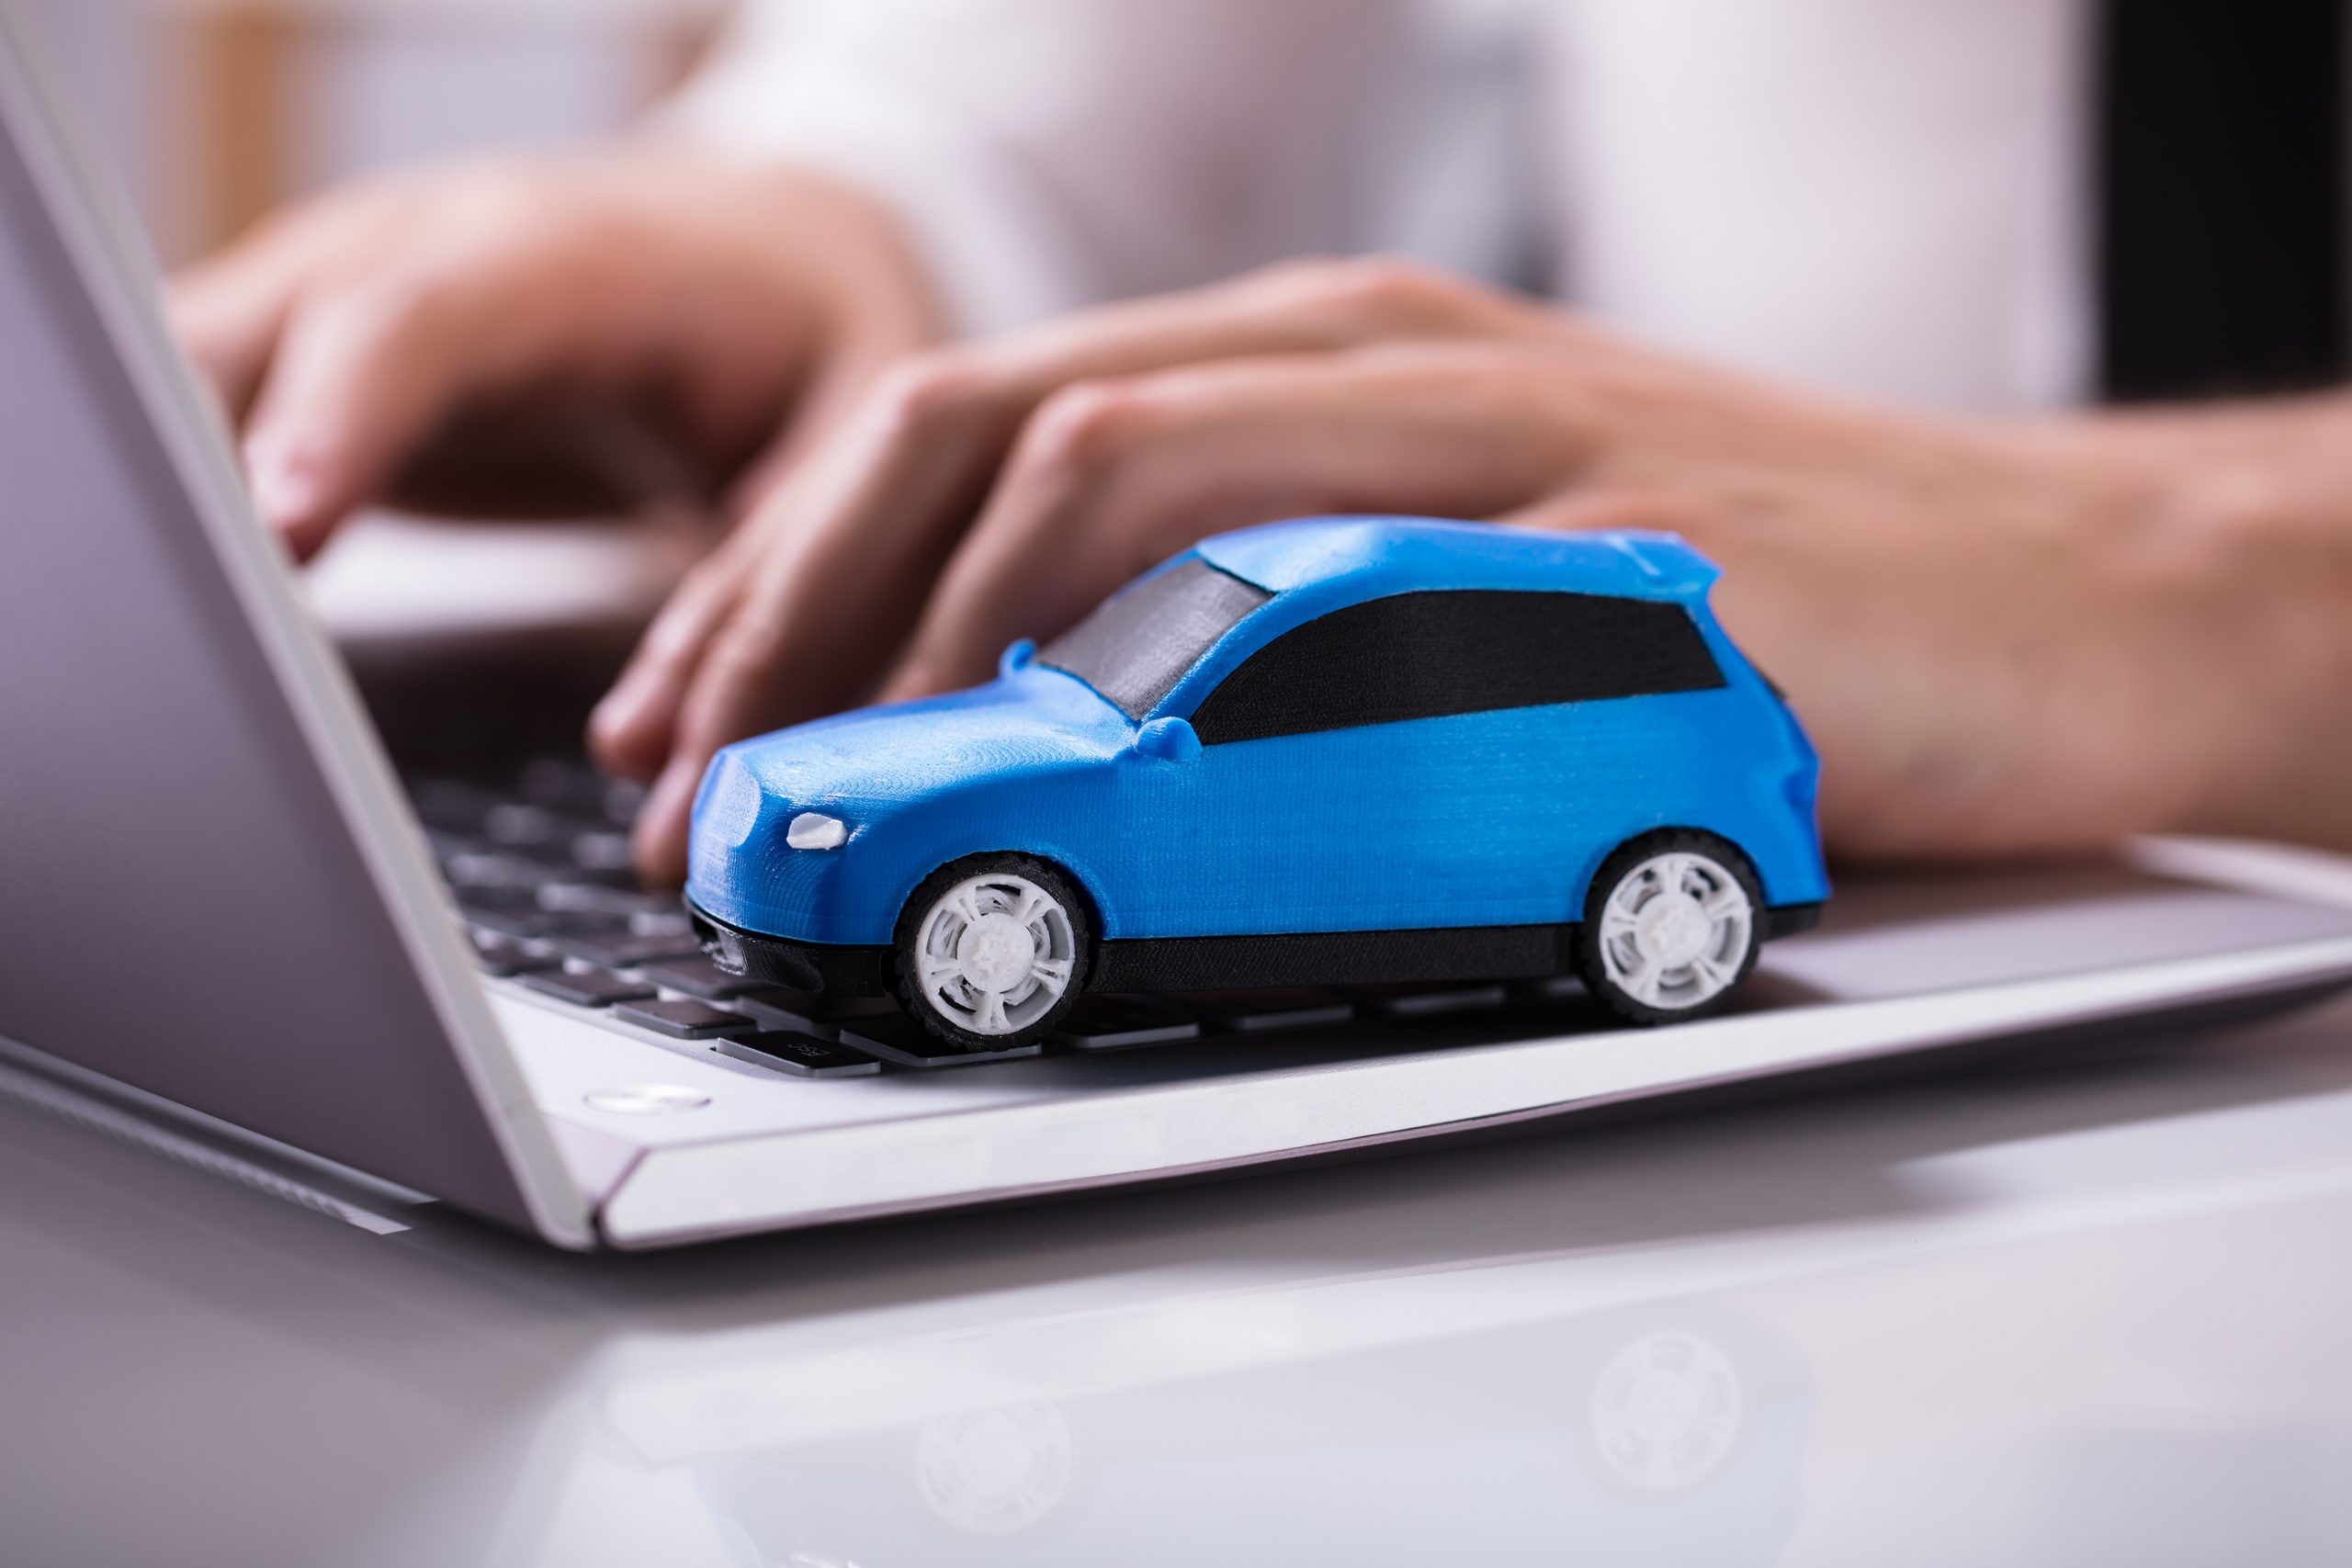 Little Known Ways to Car Insurance Cost